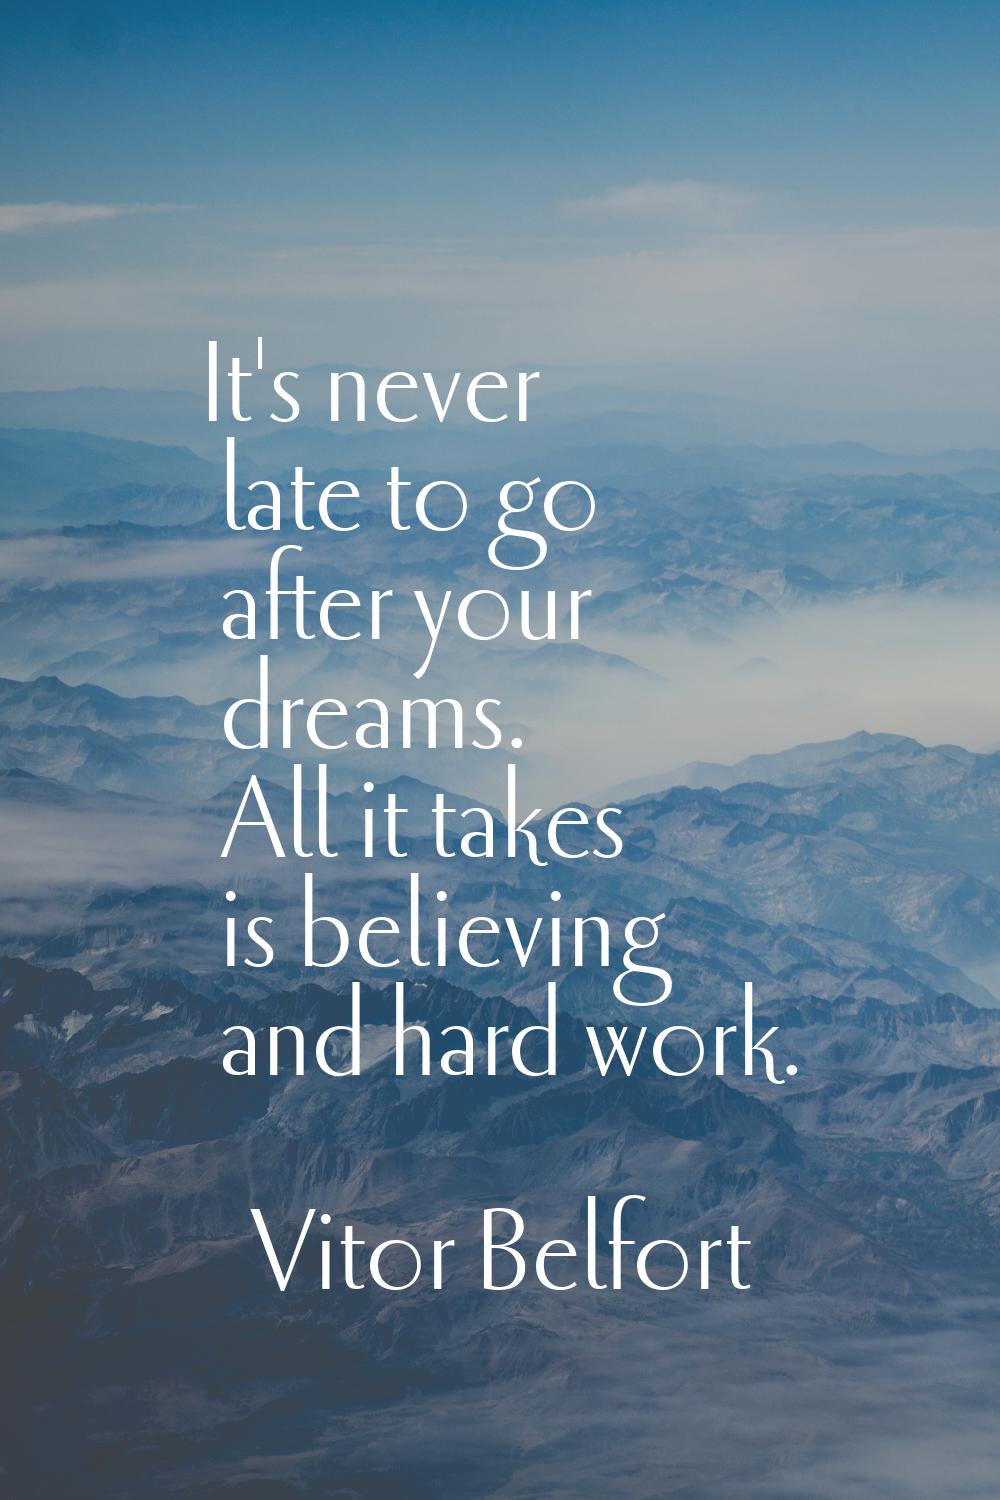 It's never late to go after your dreams. All it takes is believing and hard work.